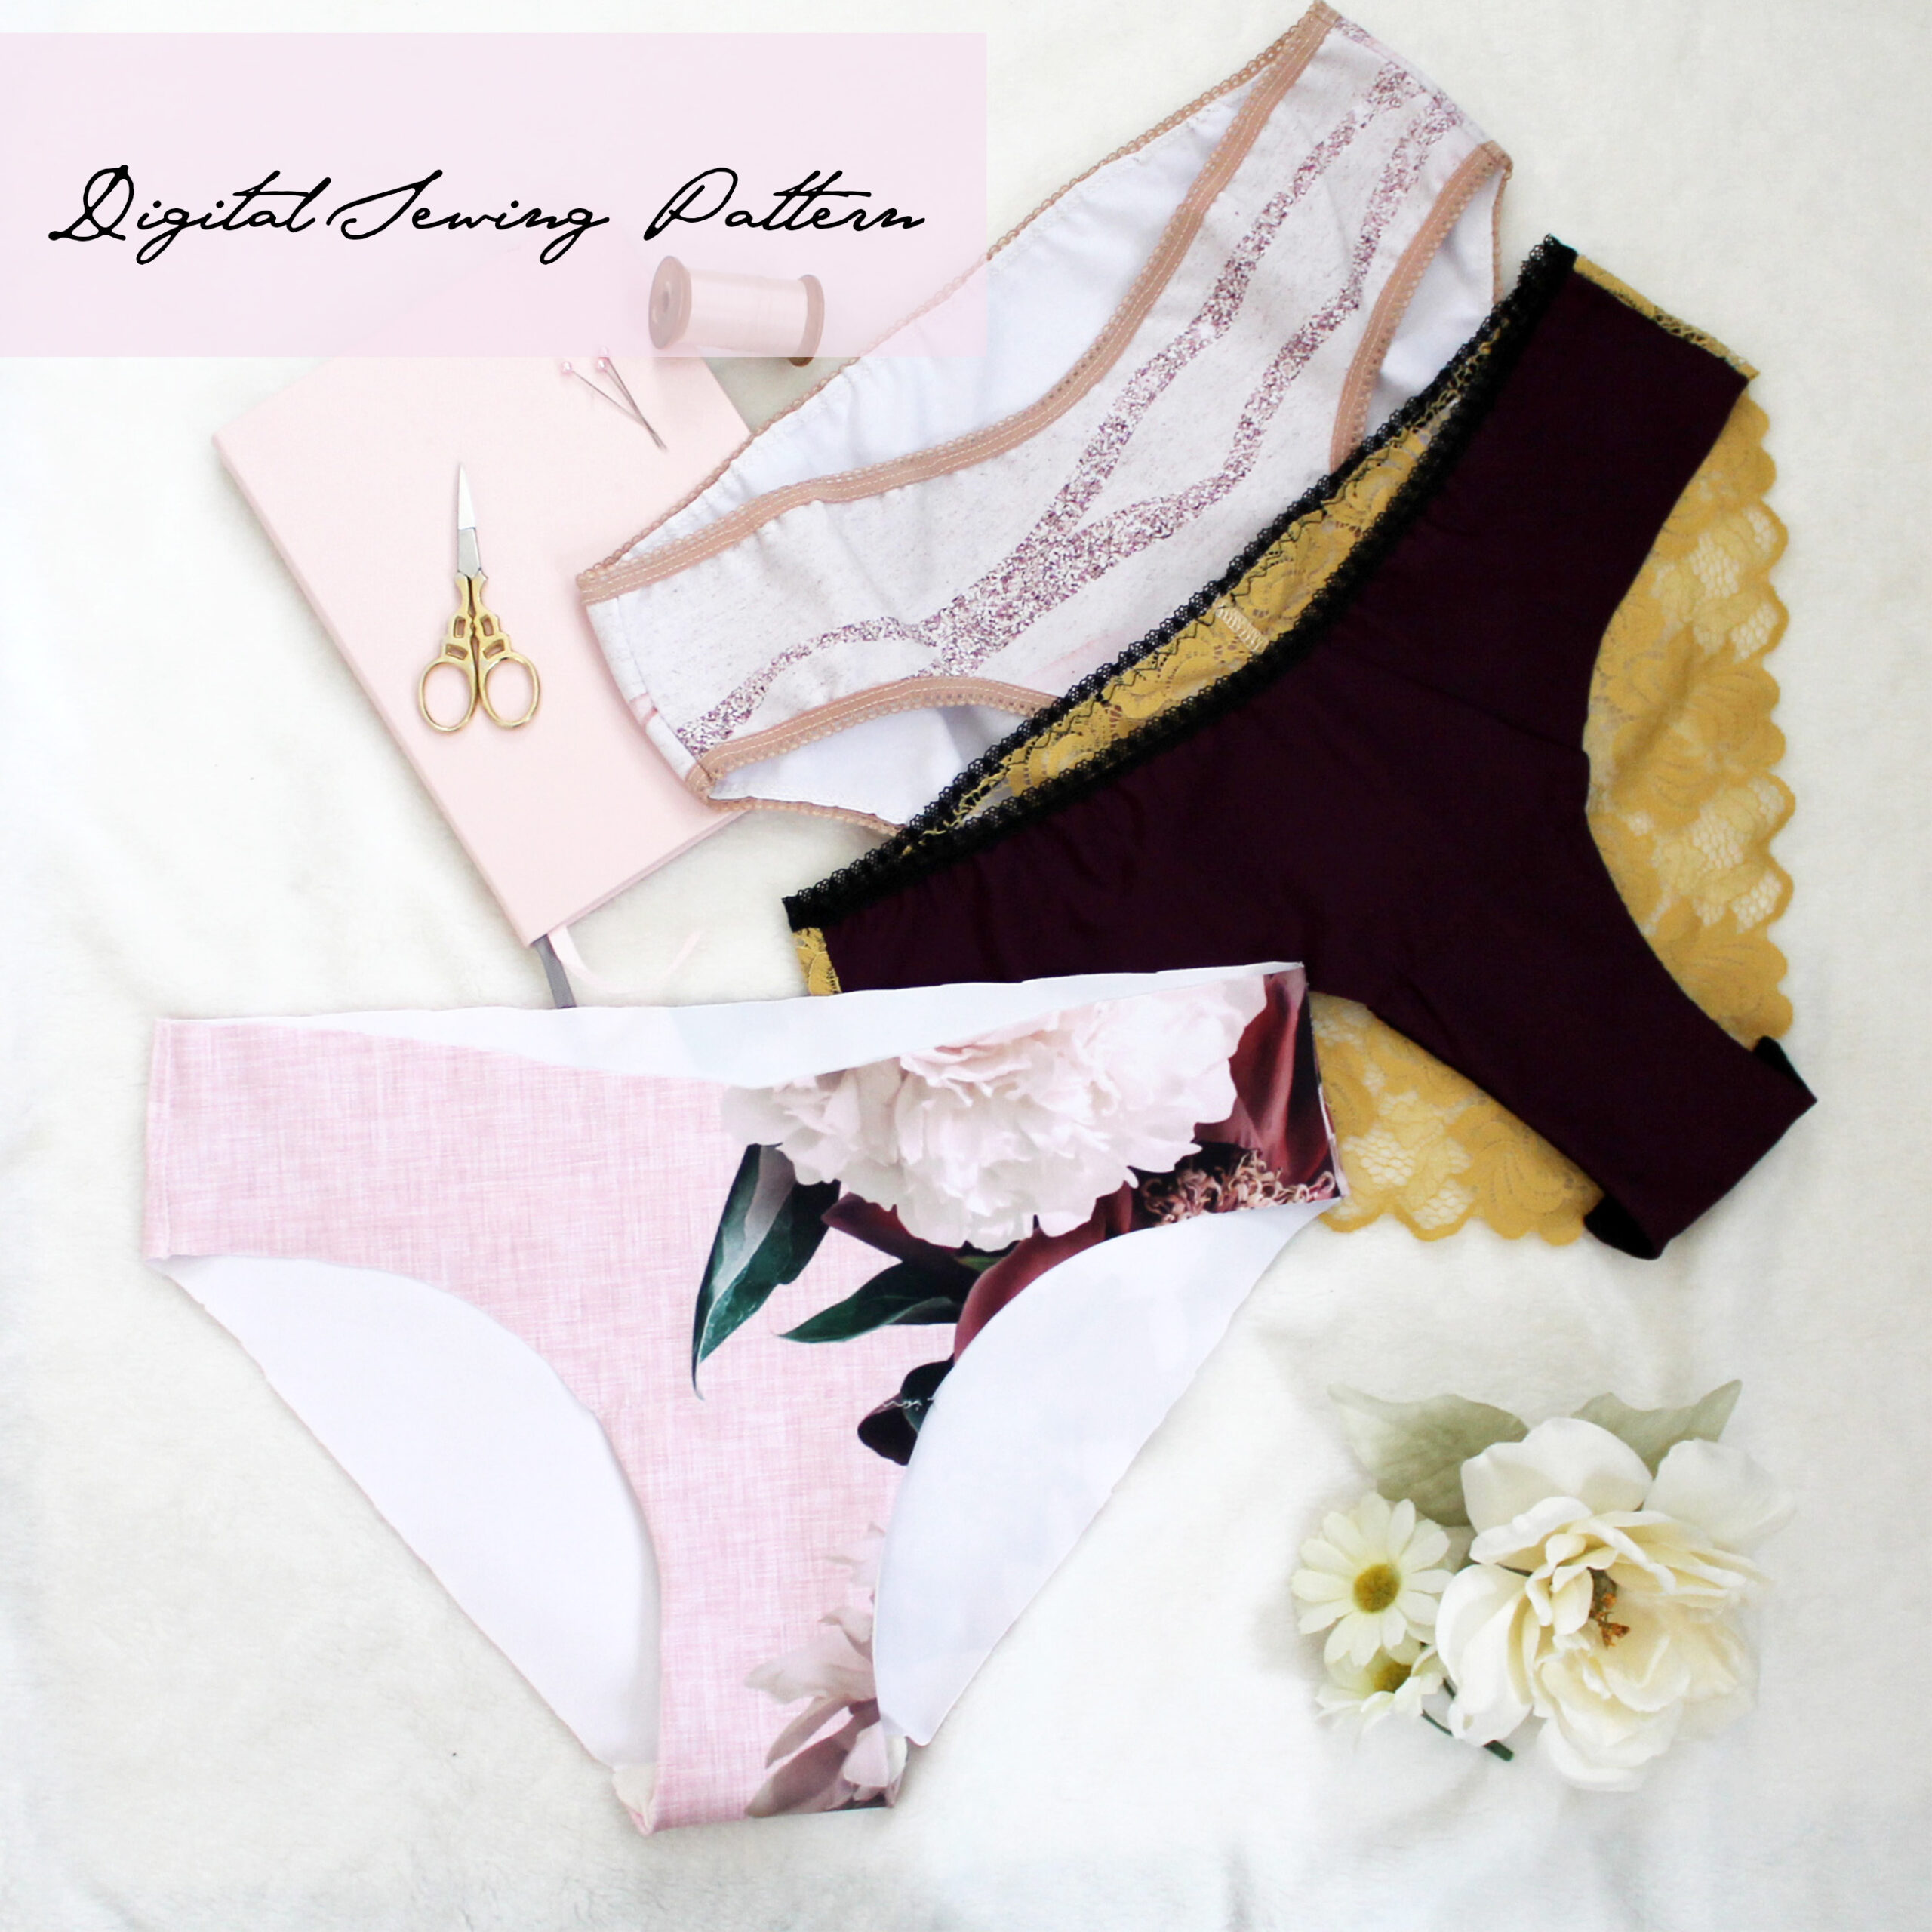 1940's Bra, Knickers and Cami-knickers PDF Lingerie Knitting Pattern